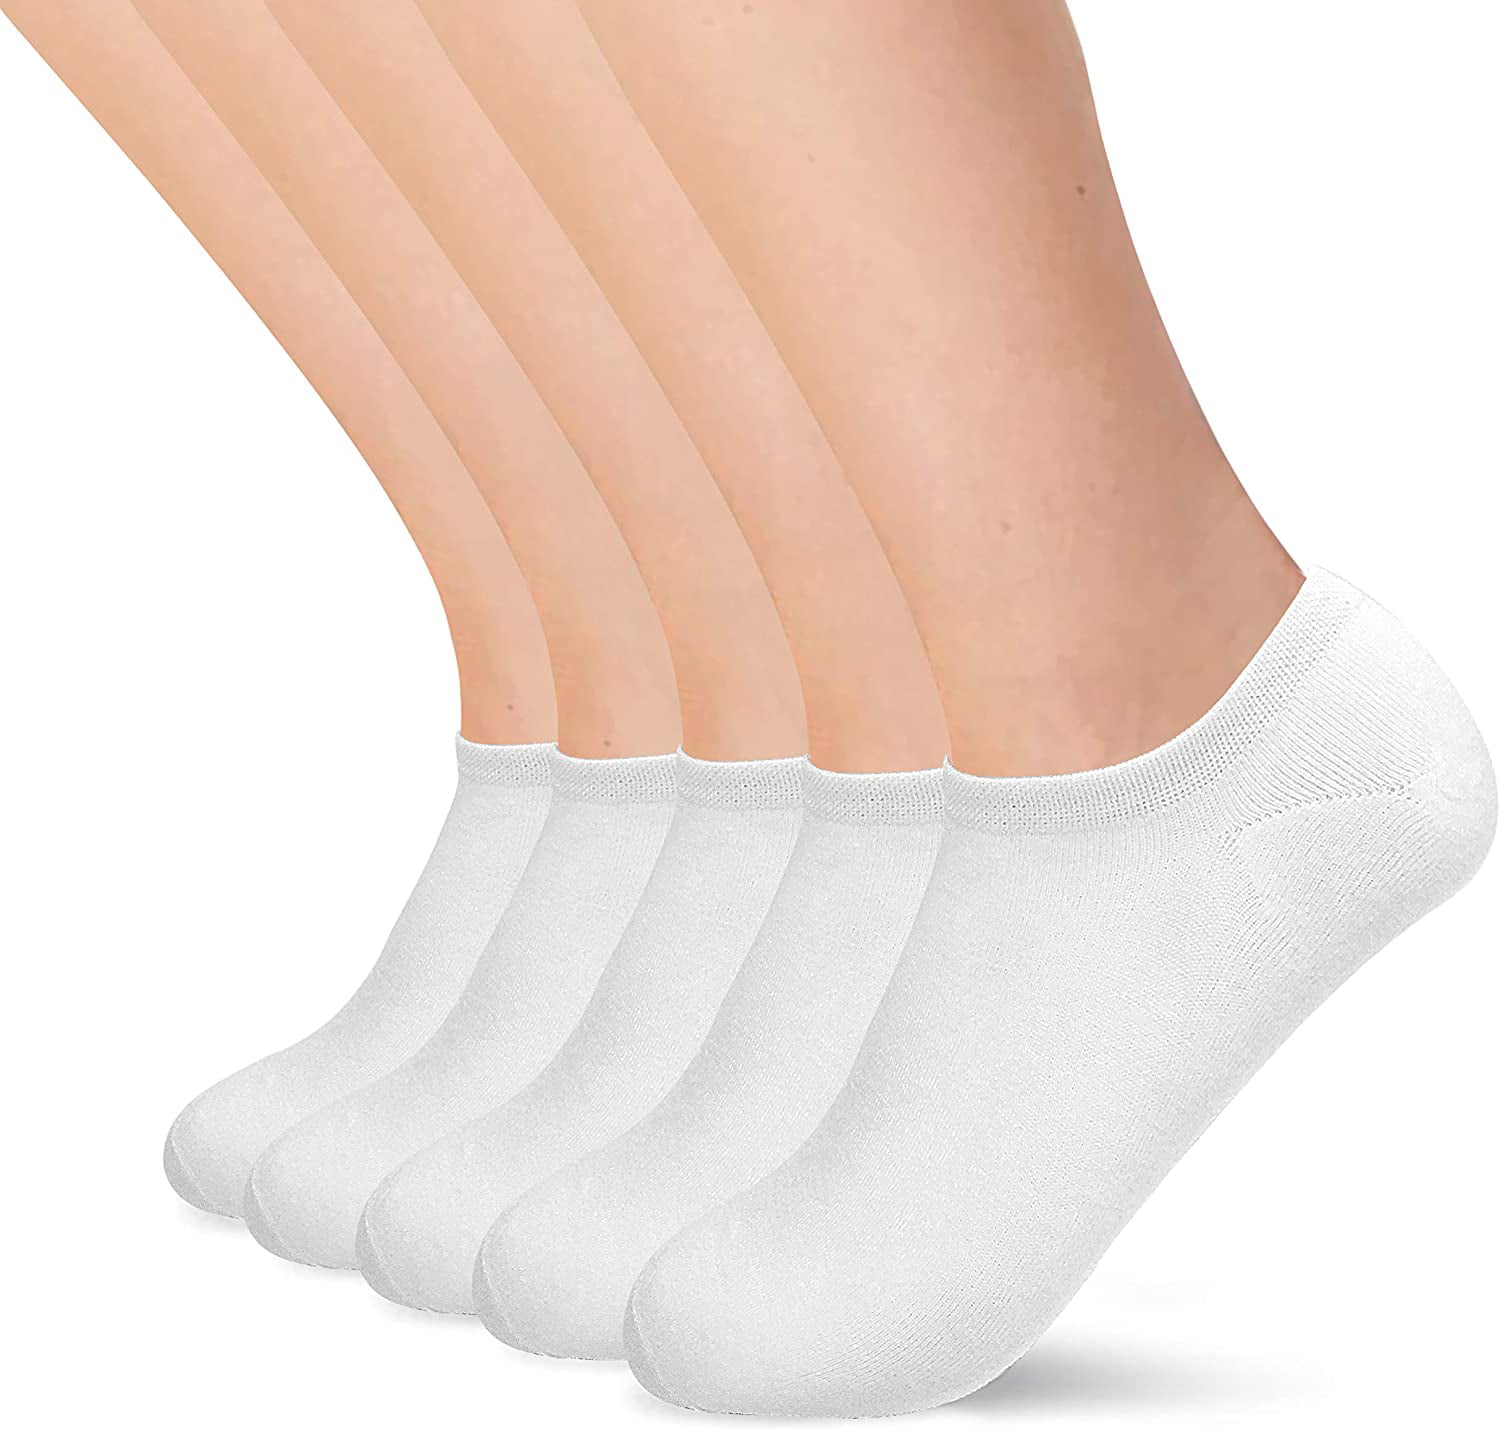 5 Pairs Adult Women Smooth Casual Sports Lovely Cat Ankle Low Cut Cotton Socks 